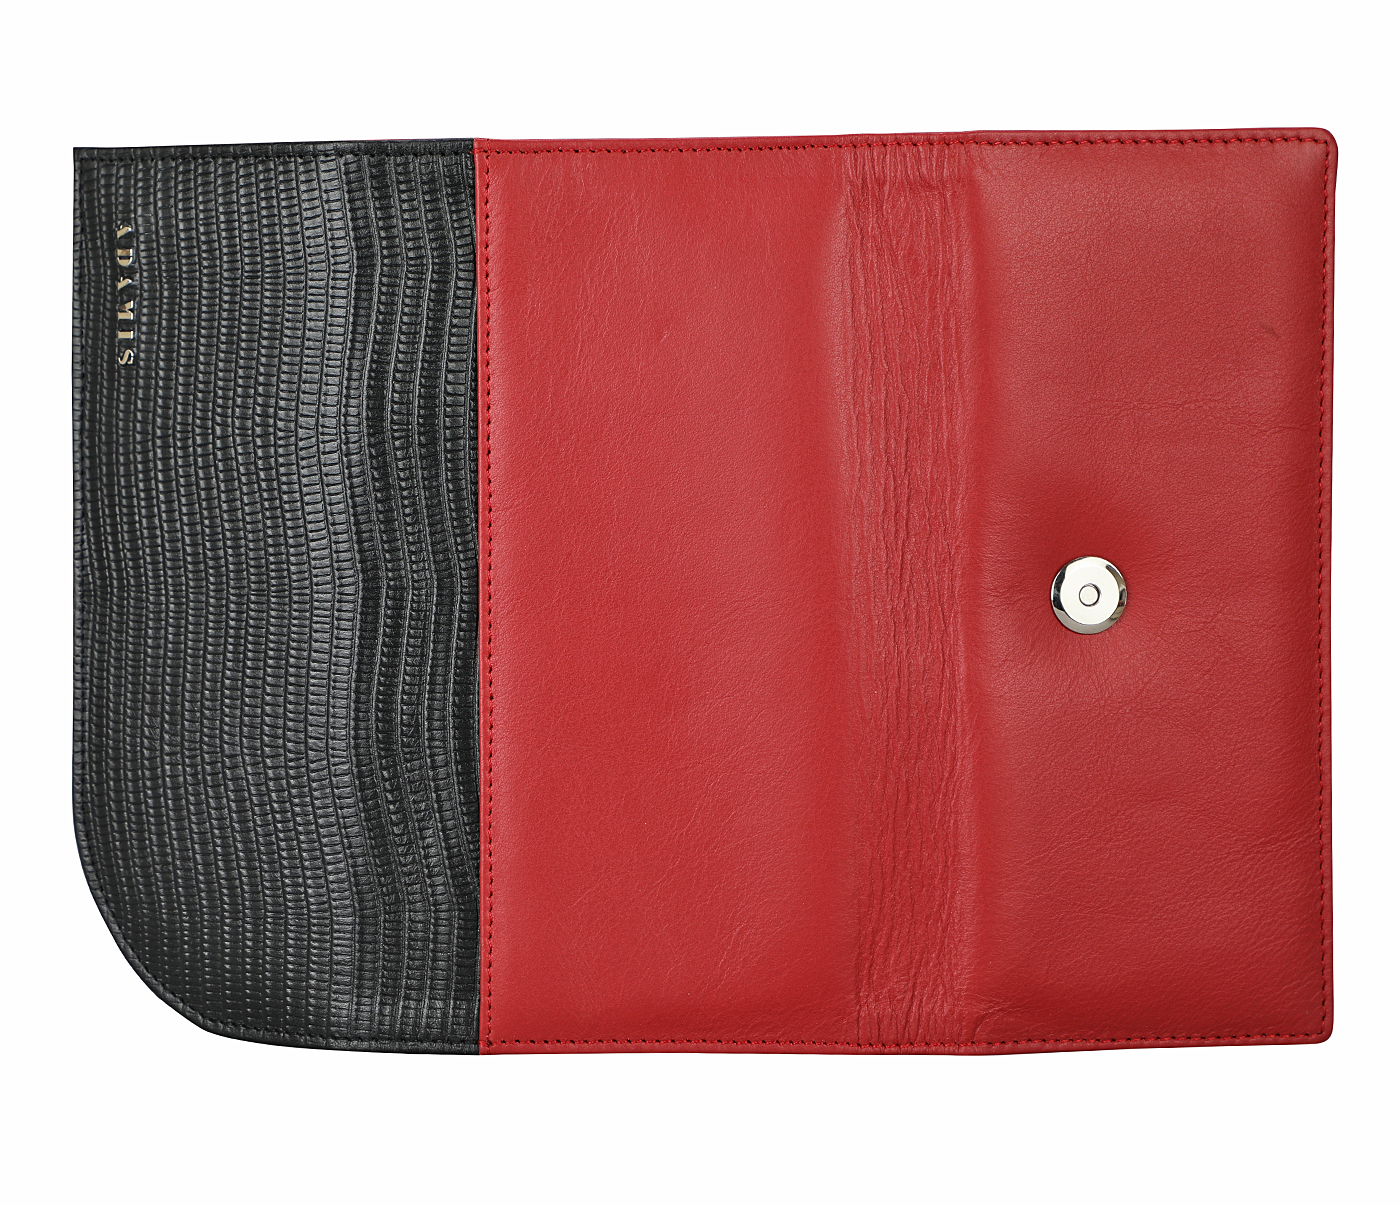 Wallet-Evelyn-Womens wallet in Genuine Leather - Black/Red